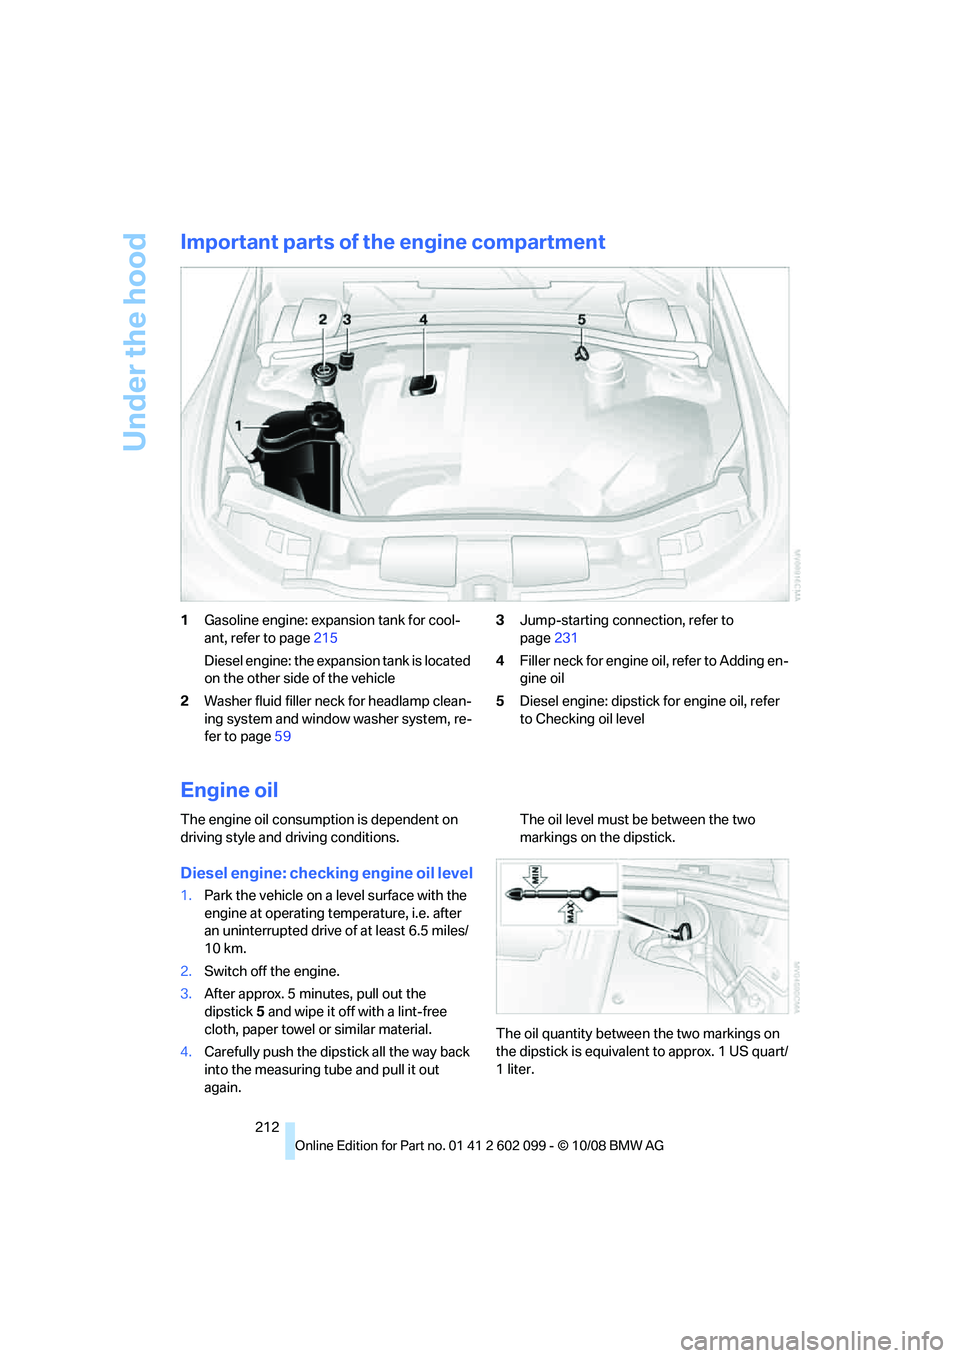 BMW 330D 2009 Owners Guide Under the hood
212
Important parts of the engine compartment
1Gasoline engine: expansion tank for cool-
ant, refer to page 215
Diesel engine: the expansion tank is located 
on the other side of the ve